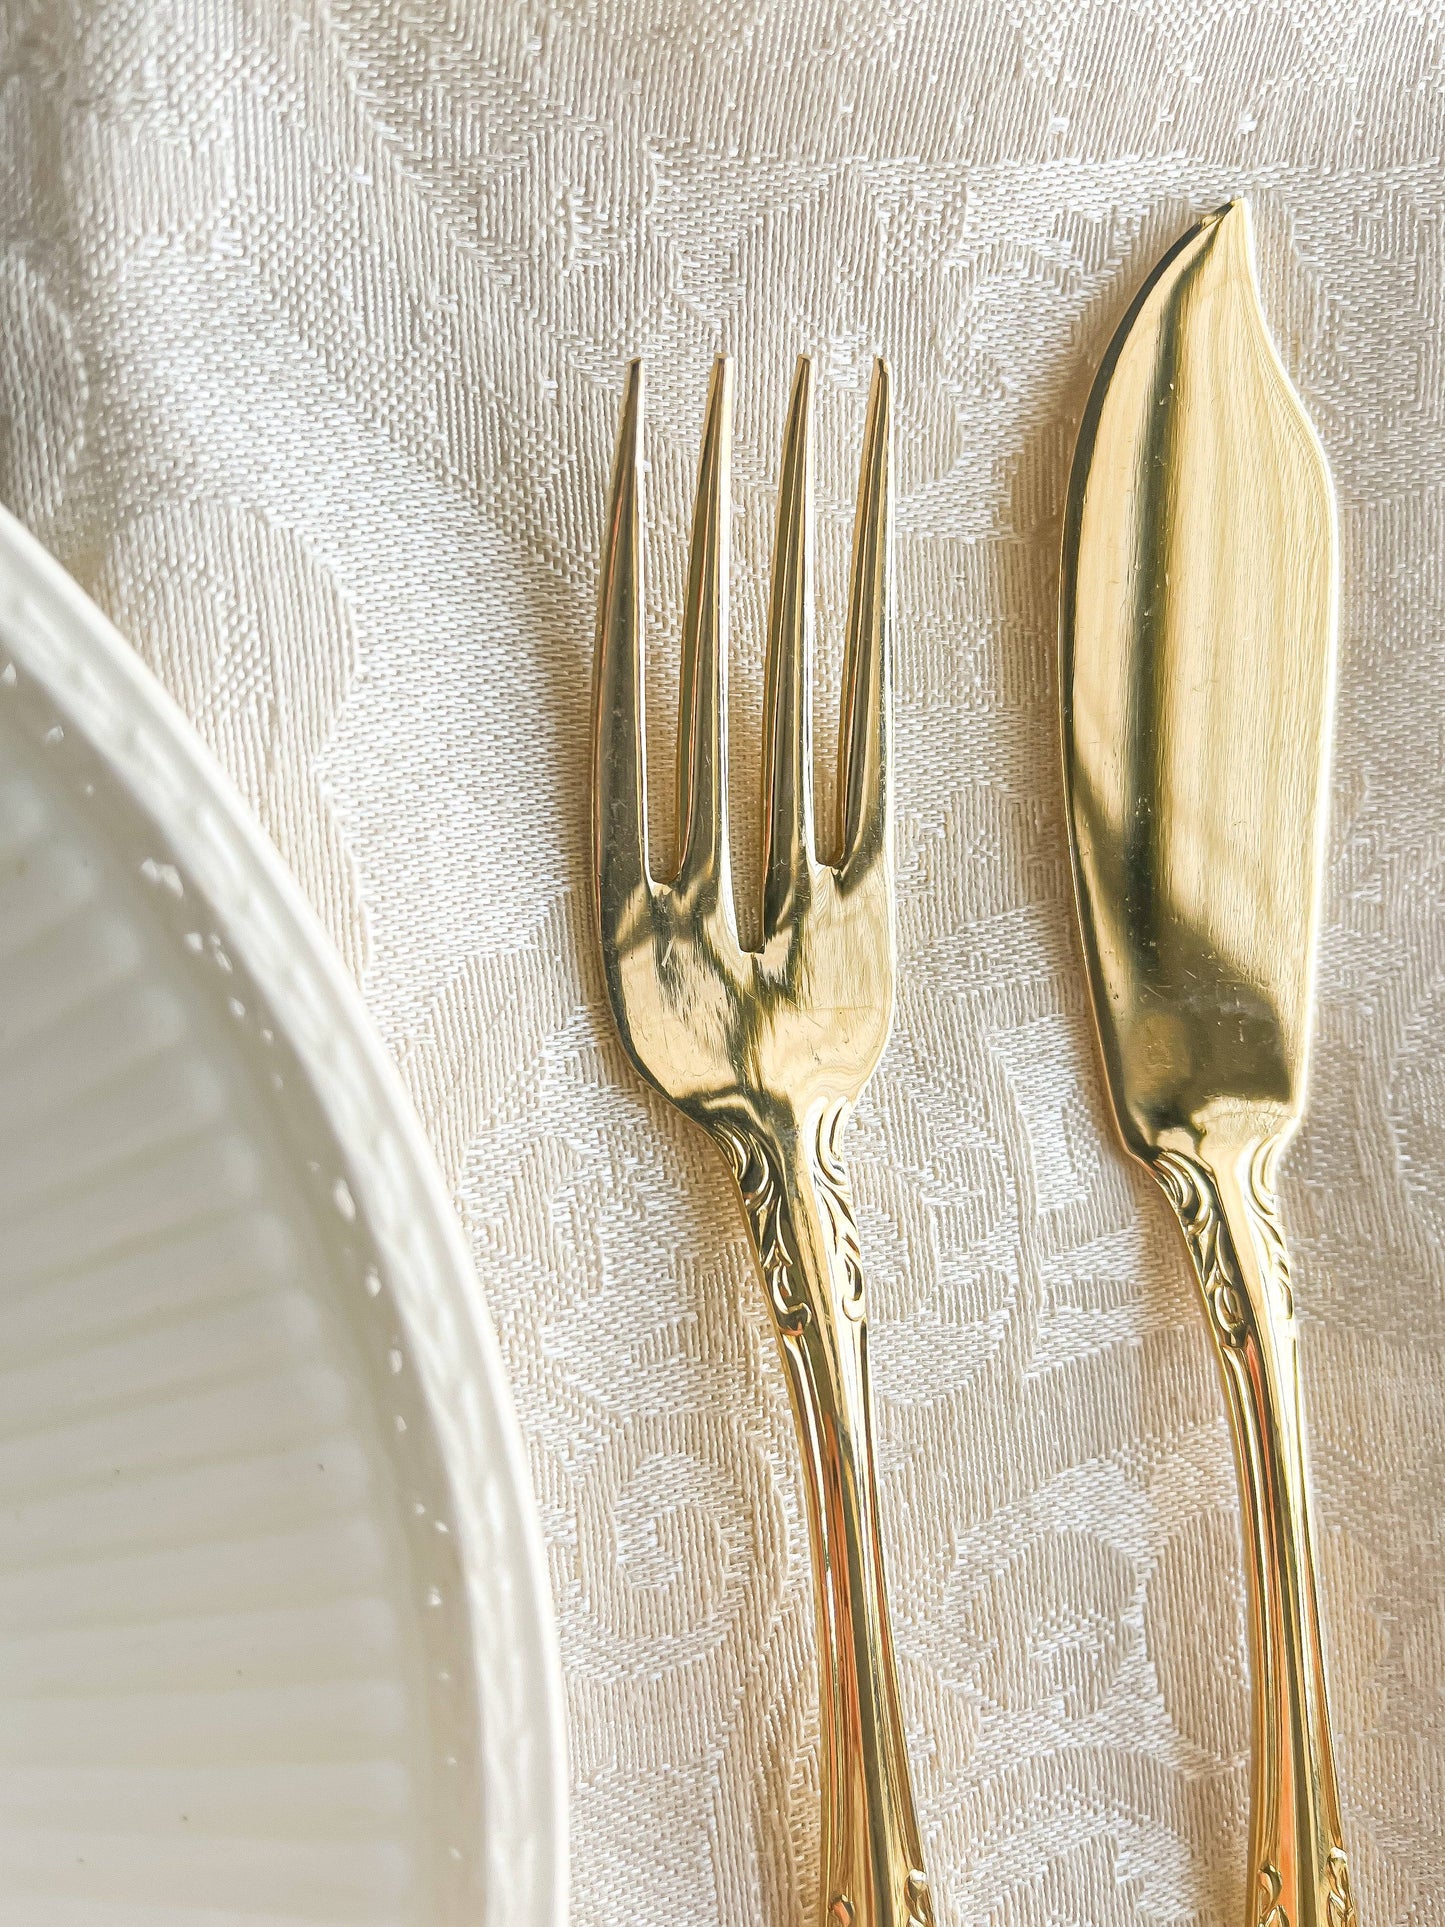 Oneida Gold-Plated Set of 6 Fish Forks and 6 Fish Knives - 'Golden Malmaison' Pattern - SOSC Home